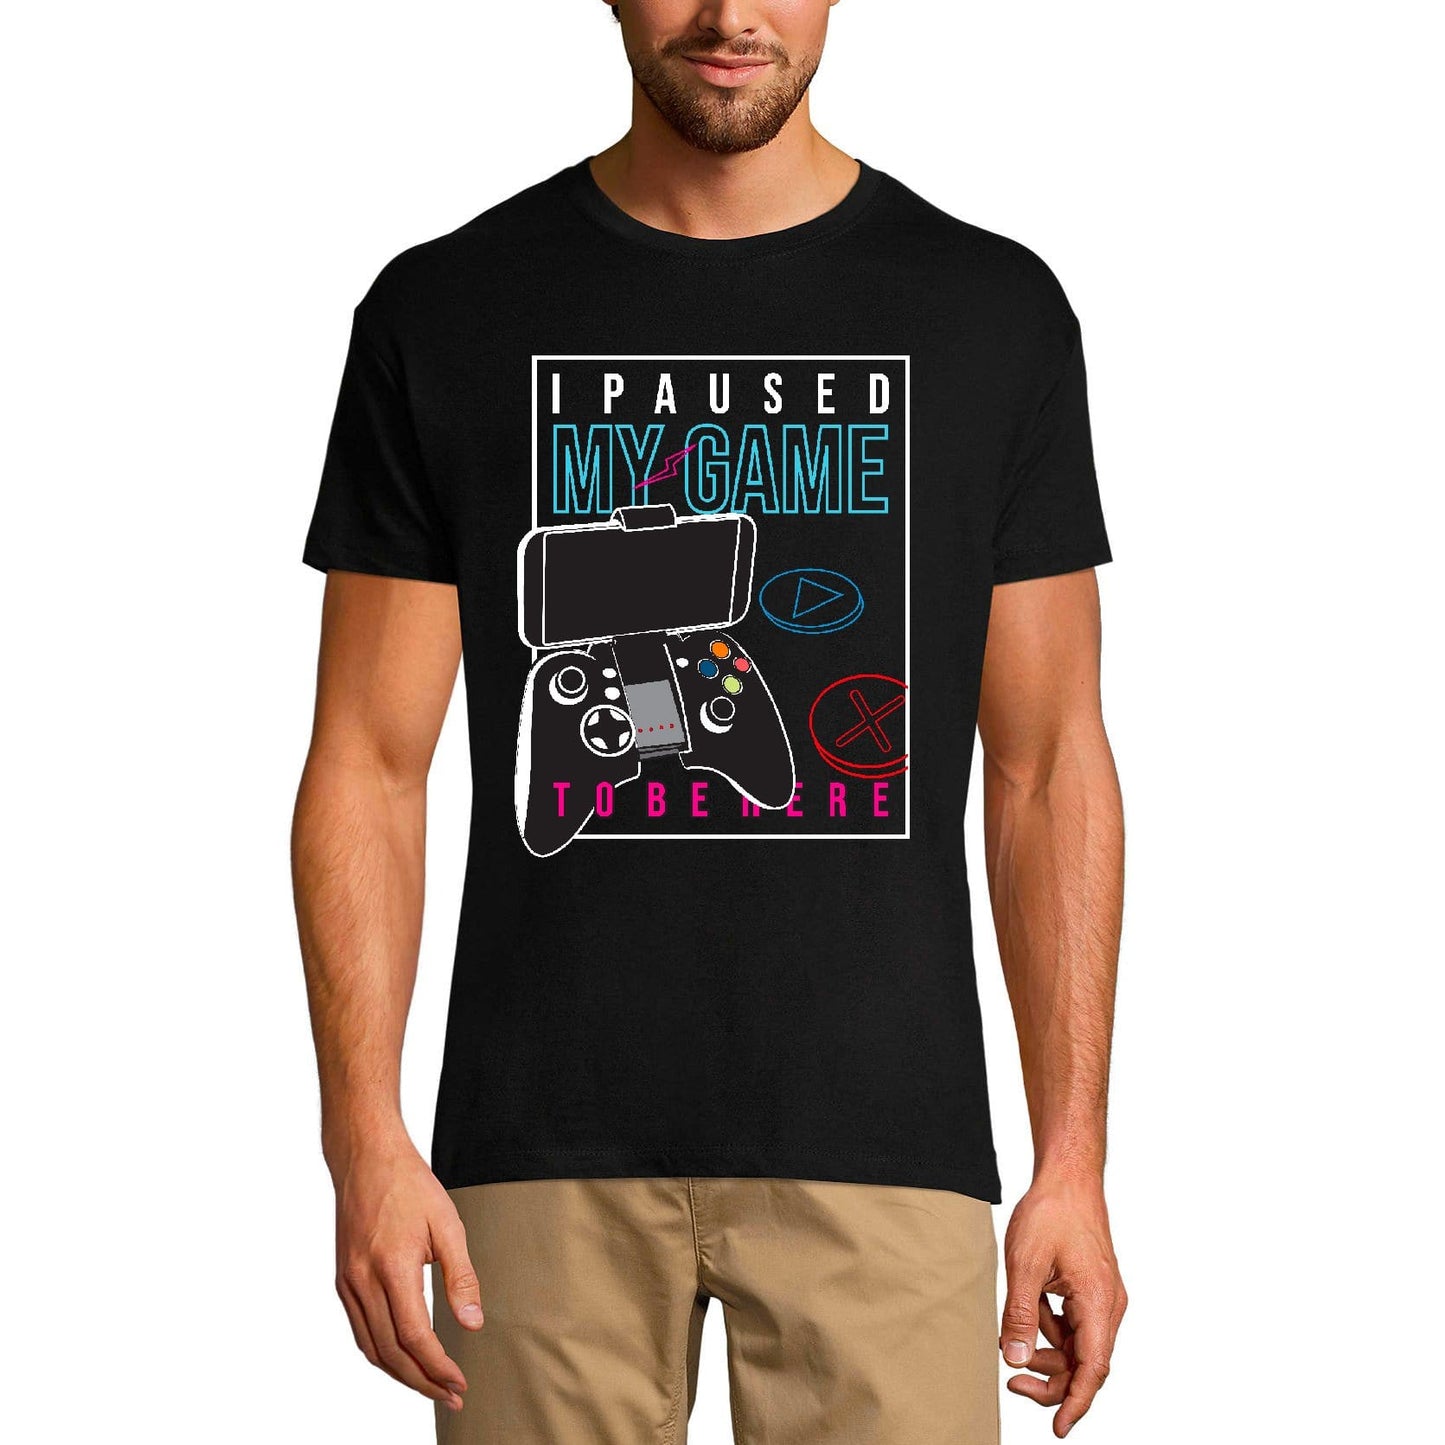 ULTRABASIC Men's Gaming T-Shirt I Paused My Game to be Here - Funny Humor Sarcasm Gamer Tee Shirt